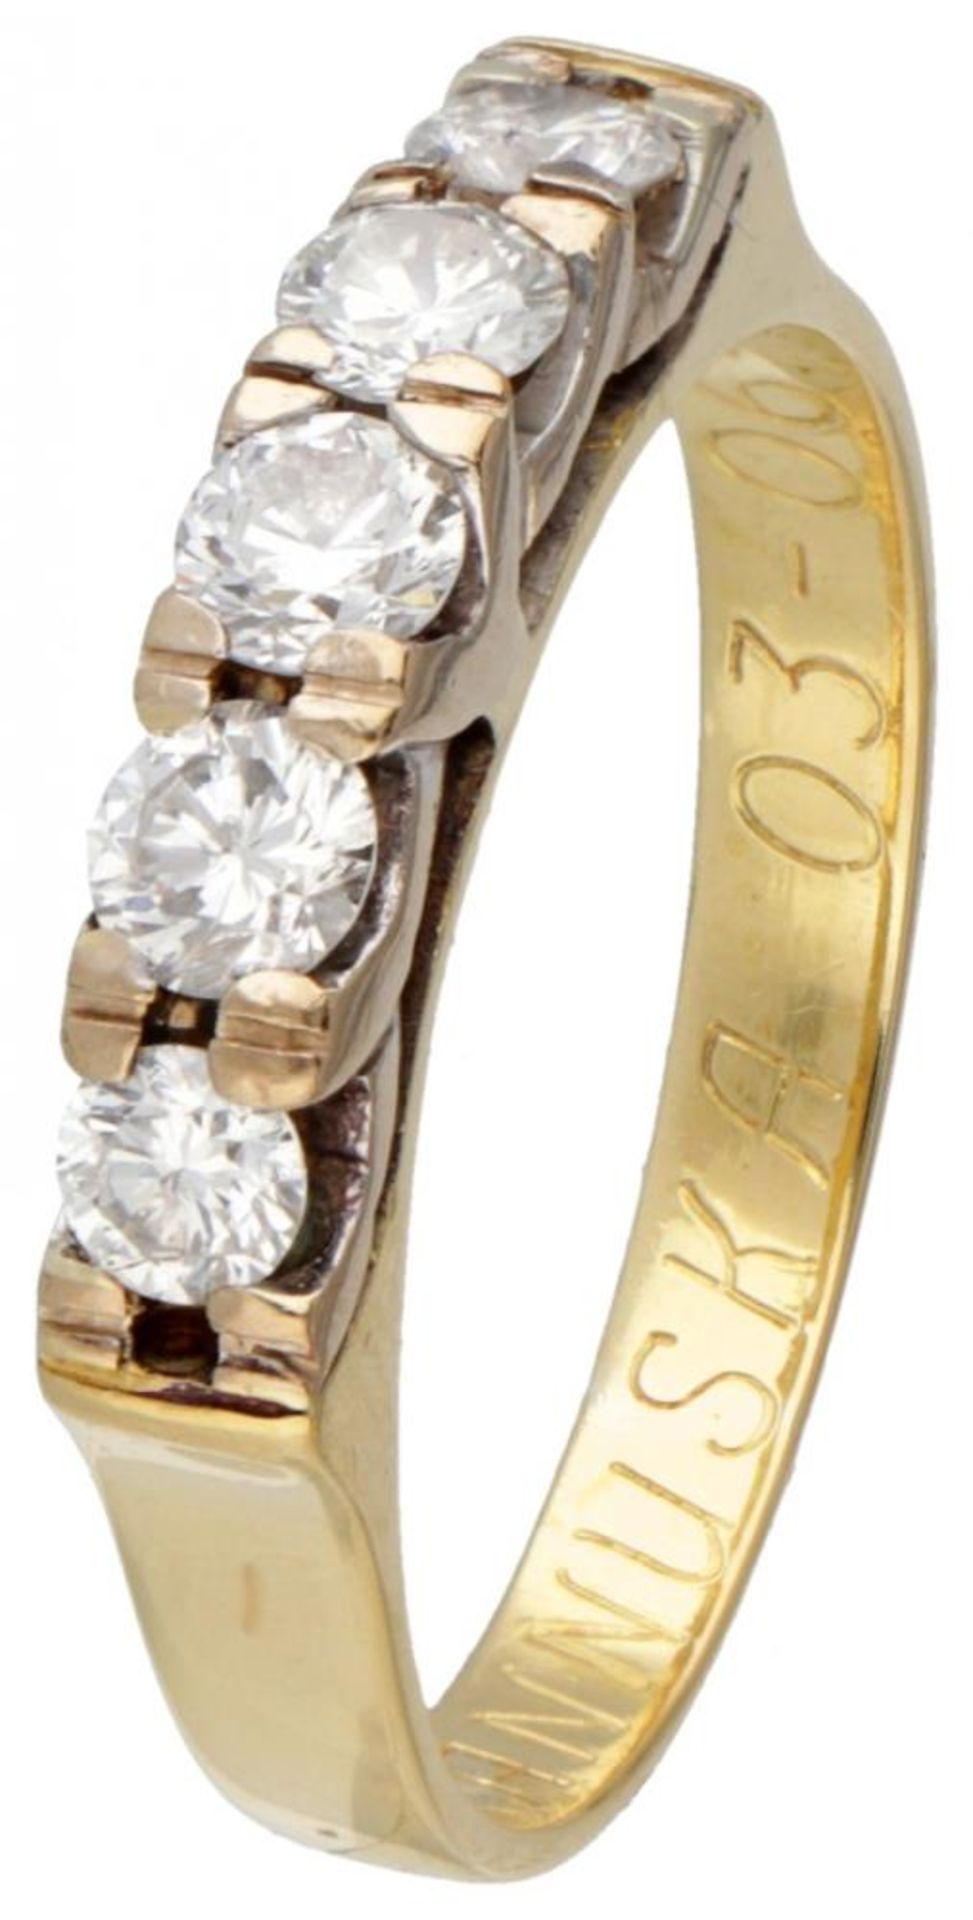 18K. Yellow gold alliance ring set with approx. 0.60 ct. diamond.